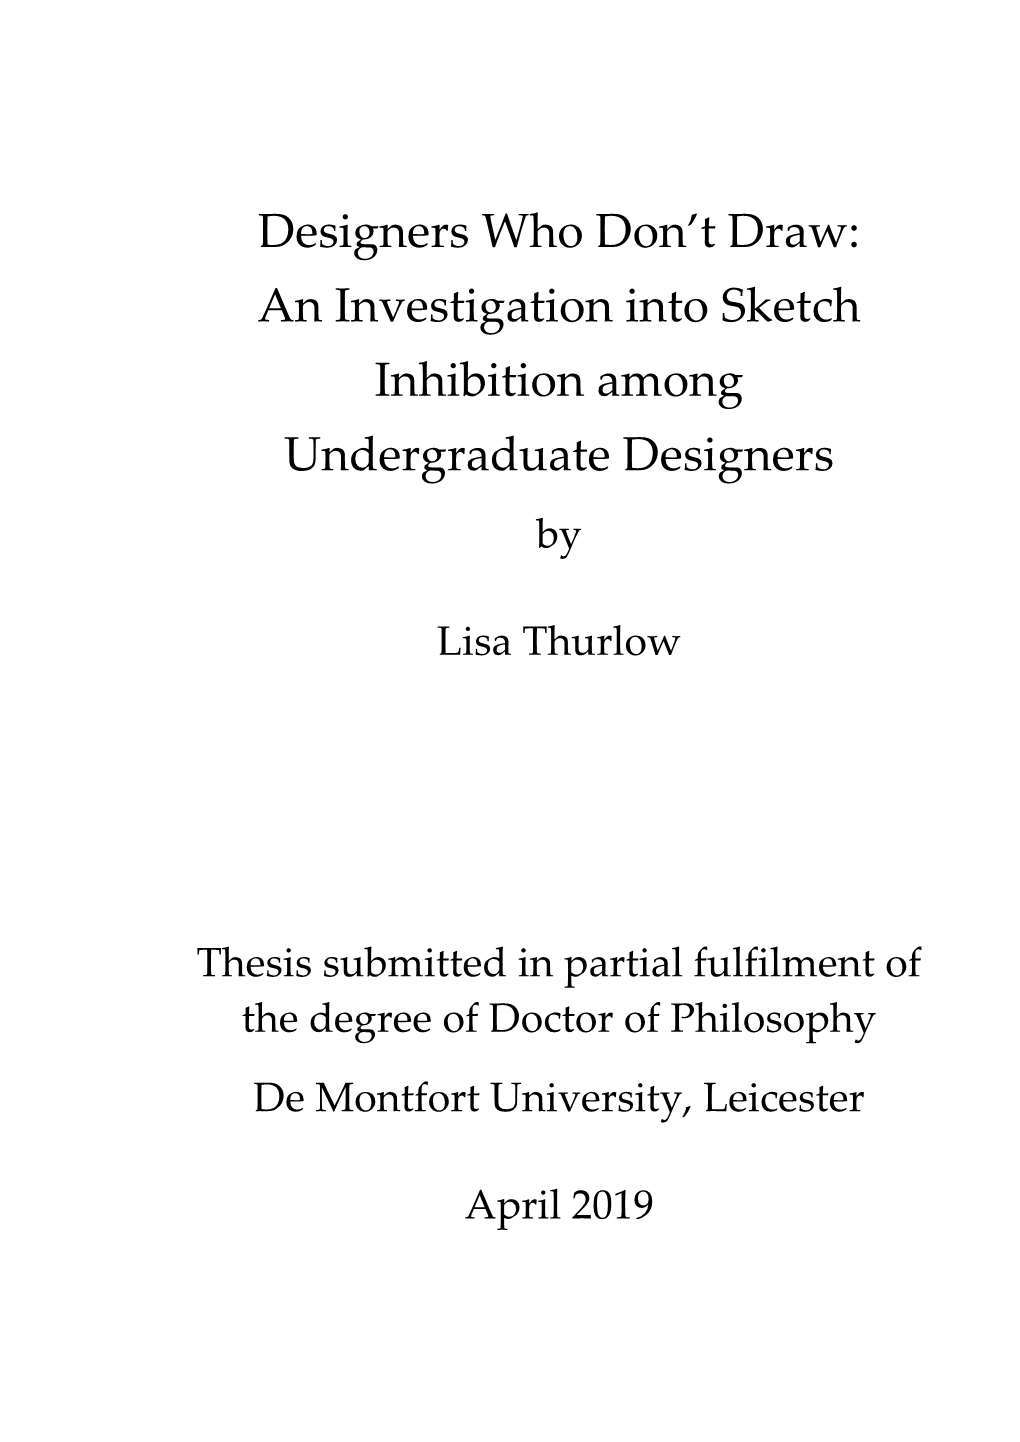 Designers Who Don't Draw: an Investigation Into Sketch Inhibition